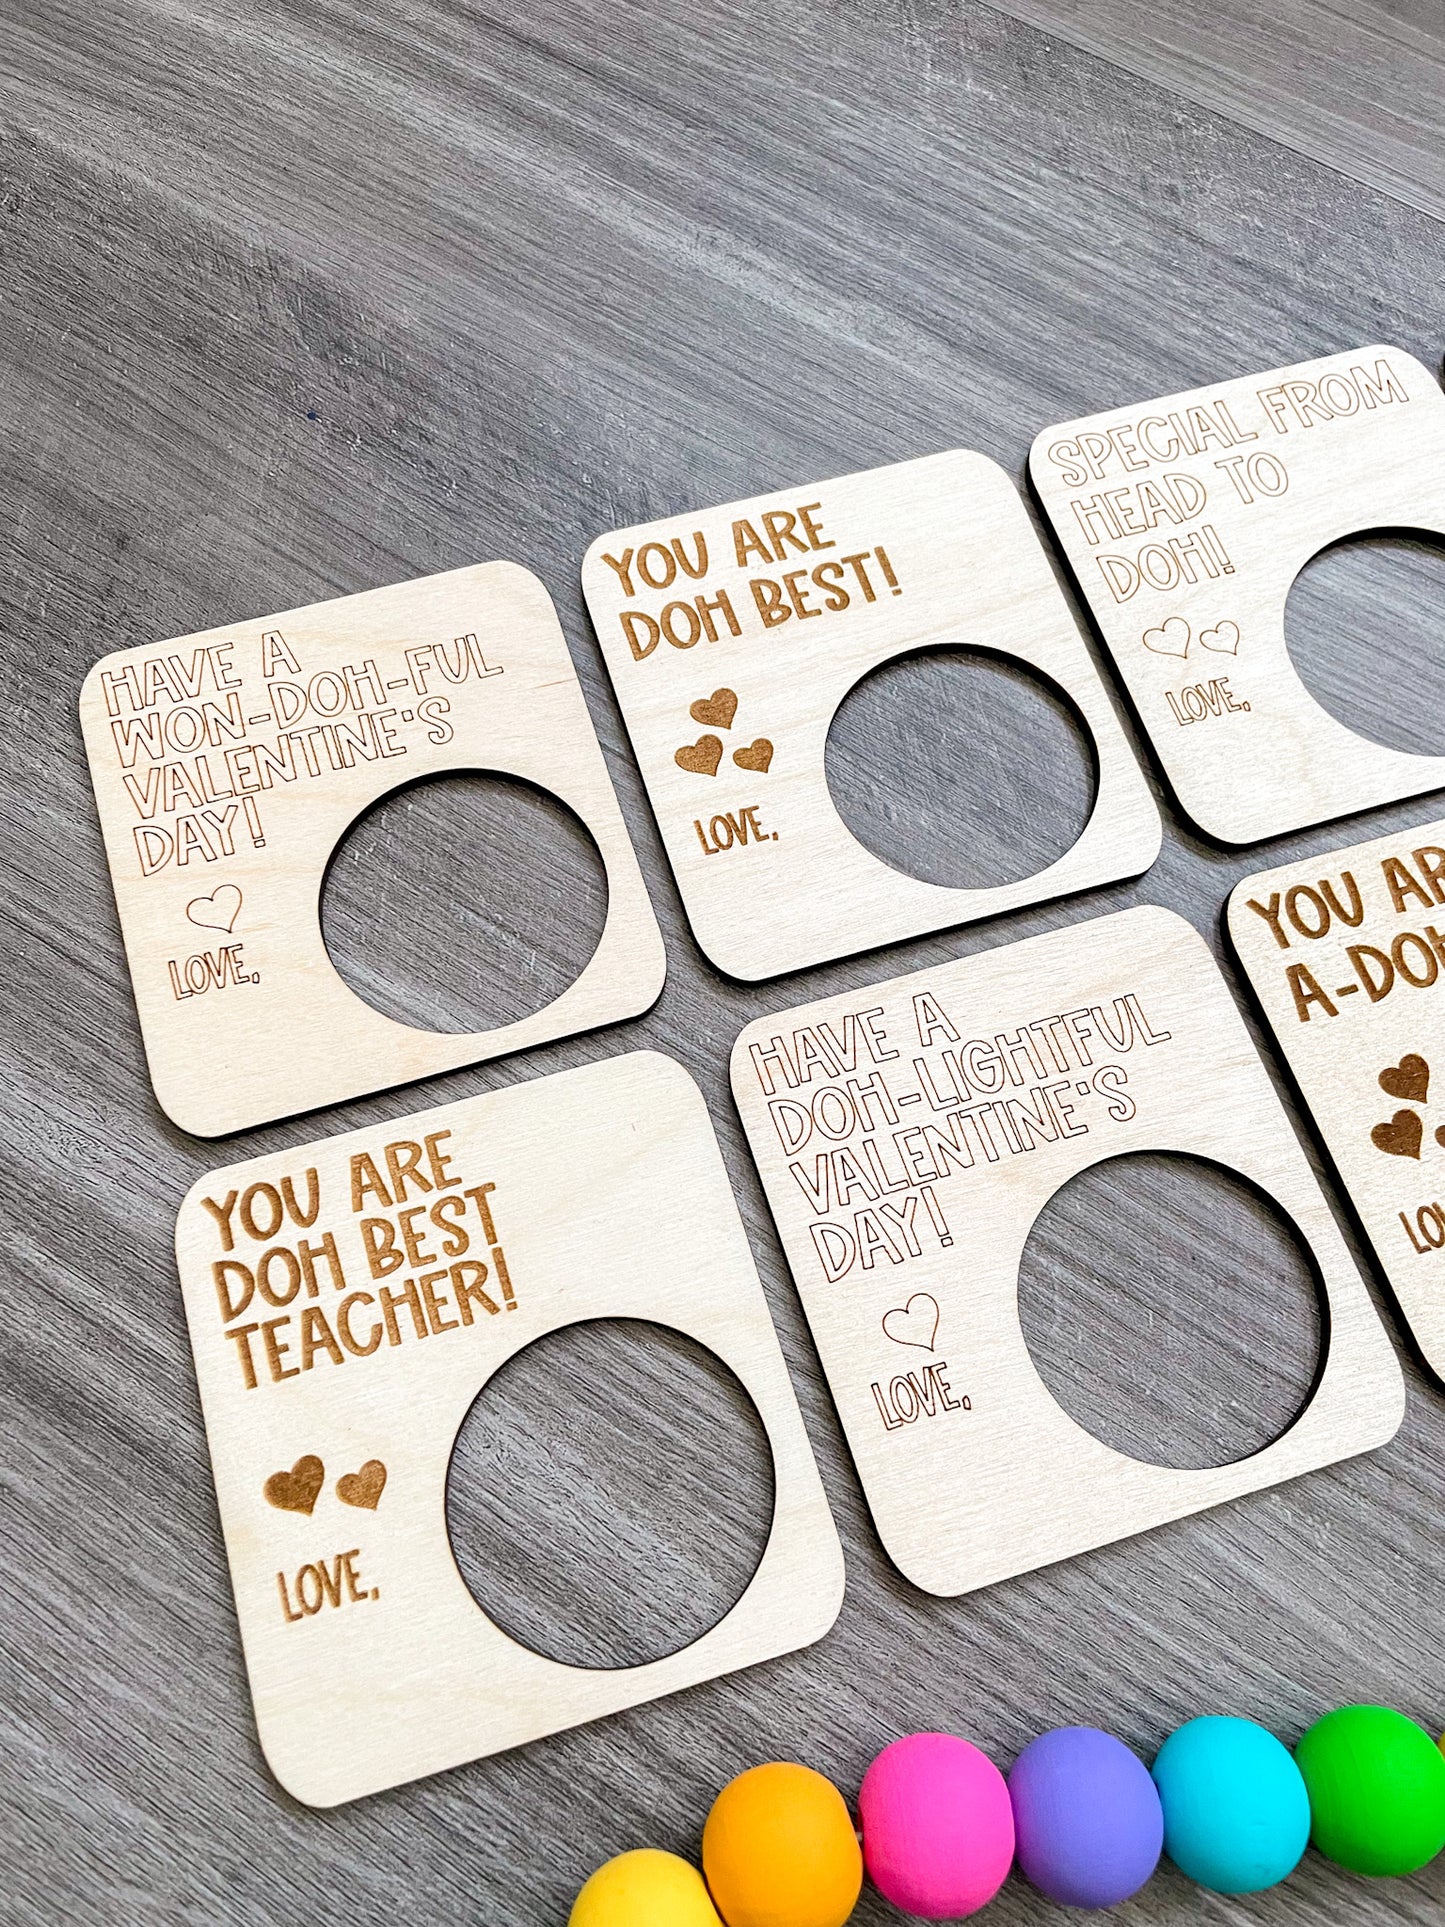 Personalized Playdough Valentines Day Cards Set of 8 | Wood | Laser Engraved and Cut